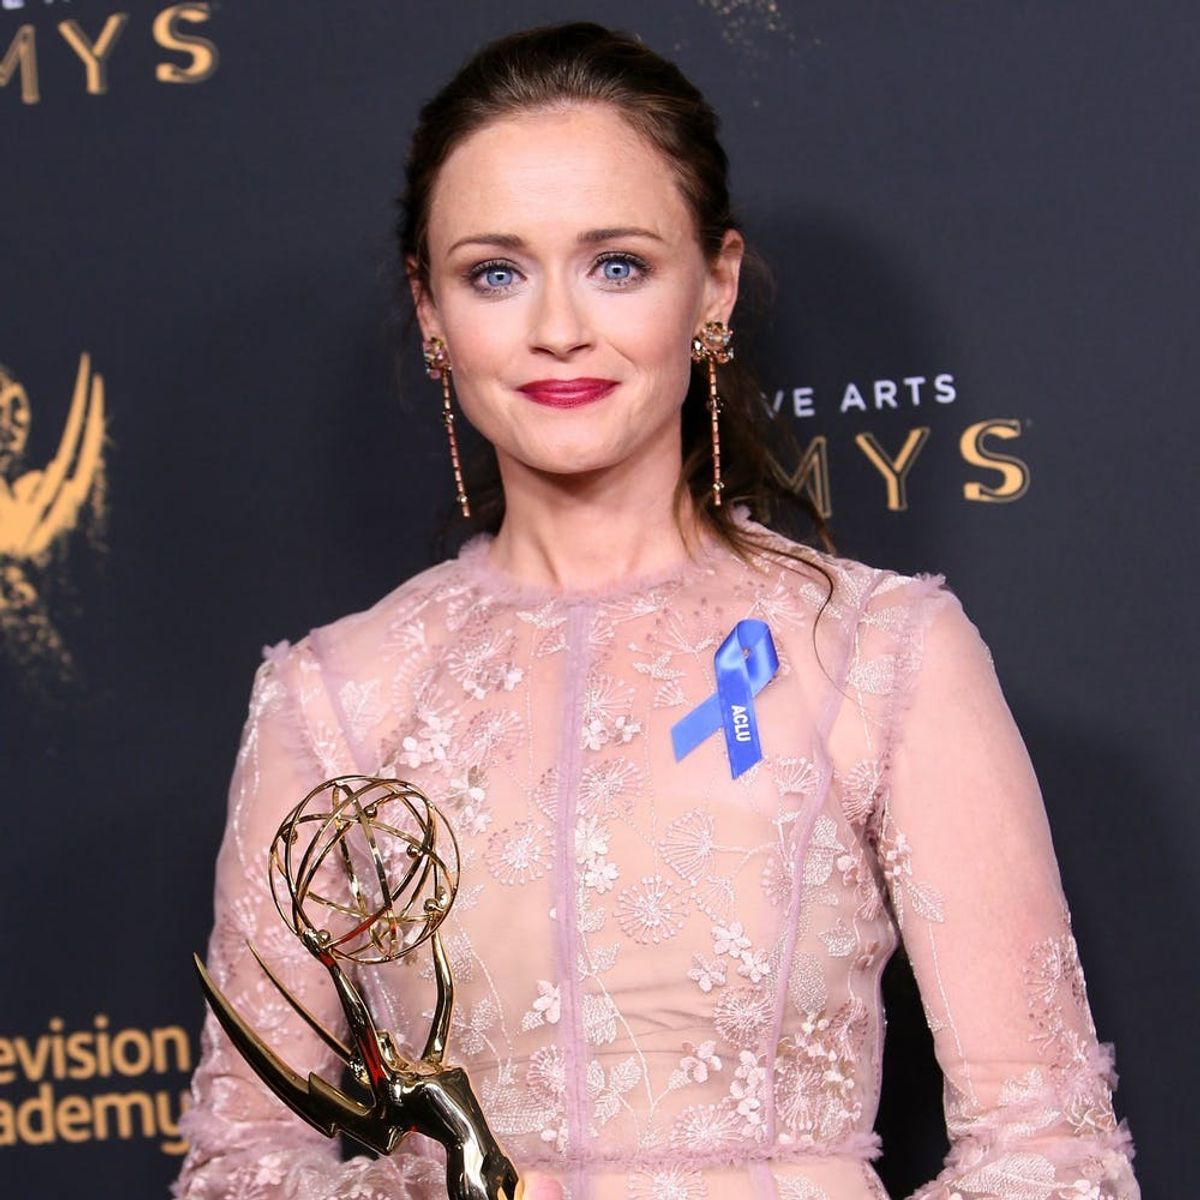 Creative Arts Emmy Awards 2017: See All the Winners!